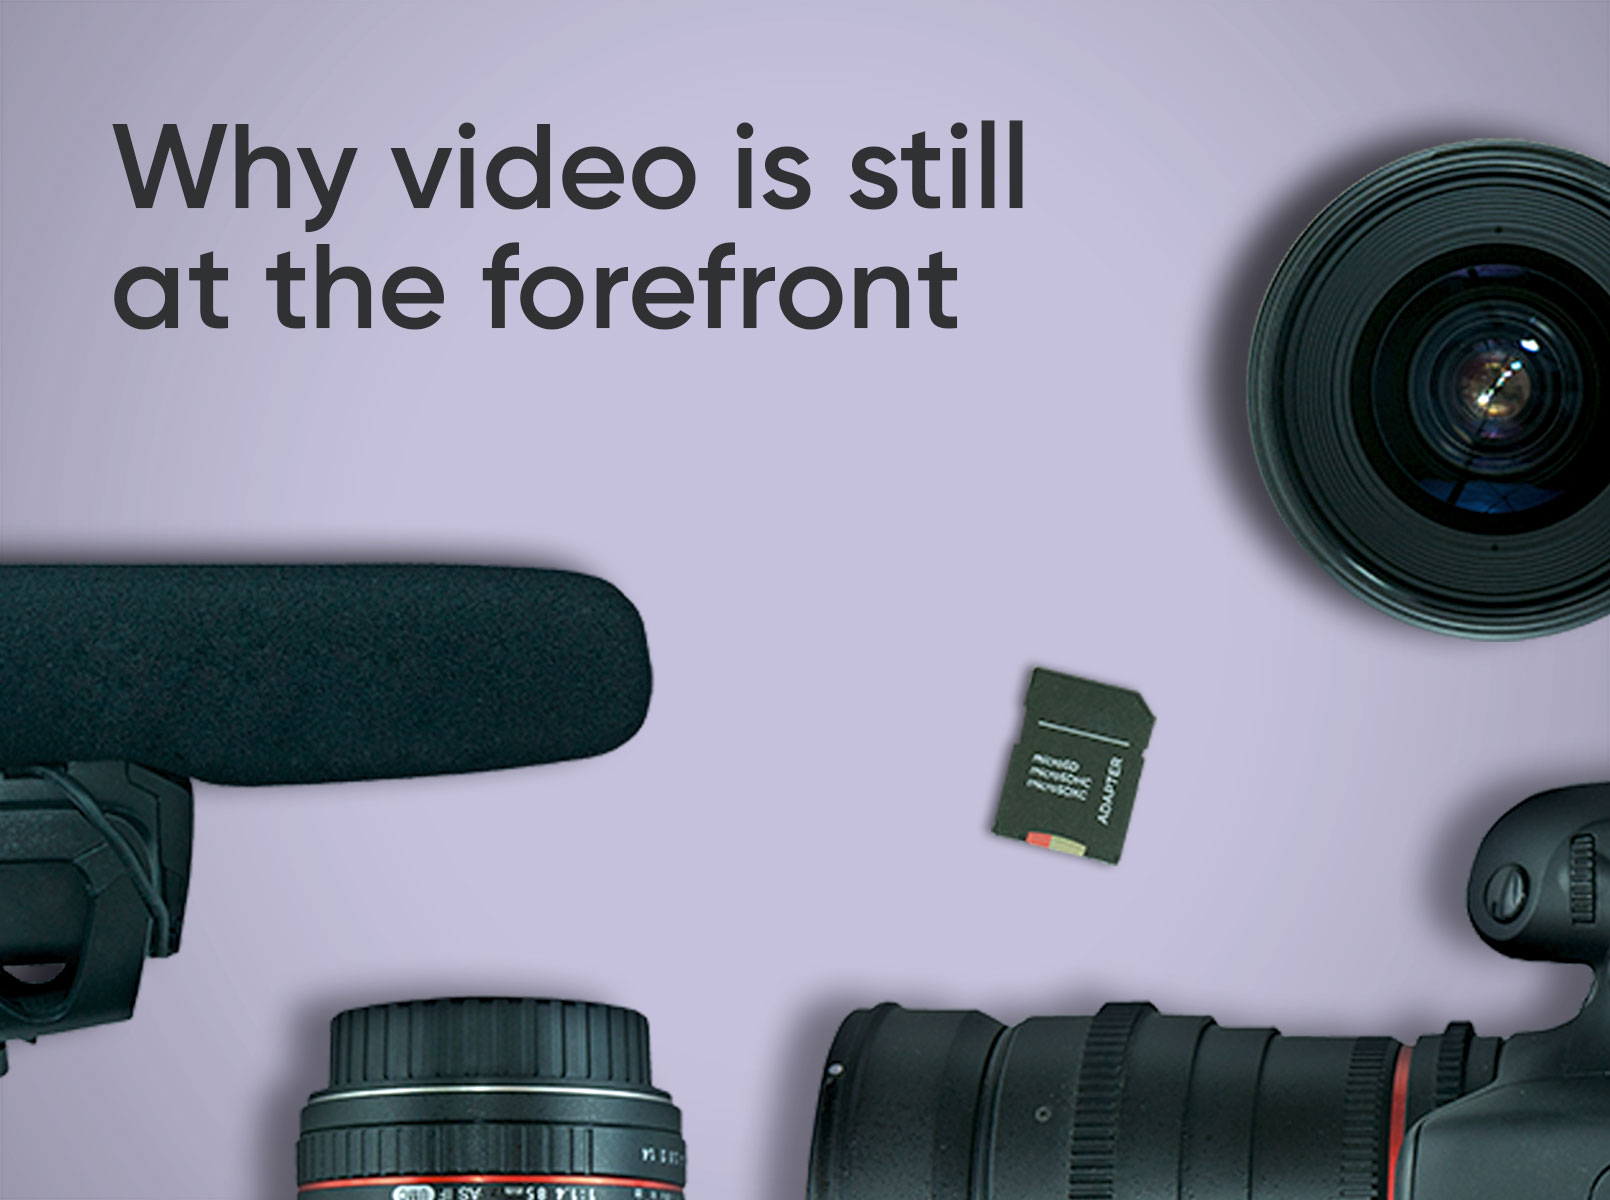 Why Video Marketing is still at the forefront